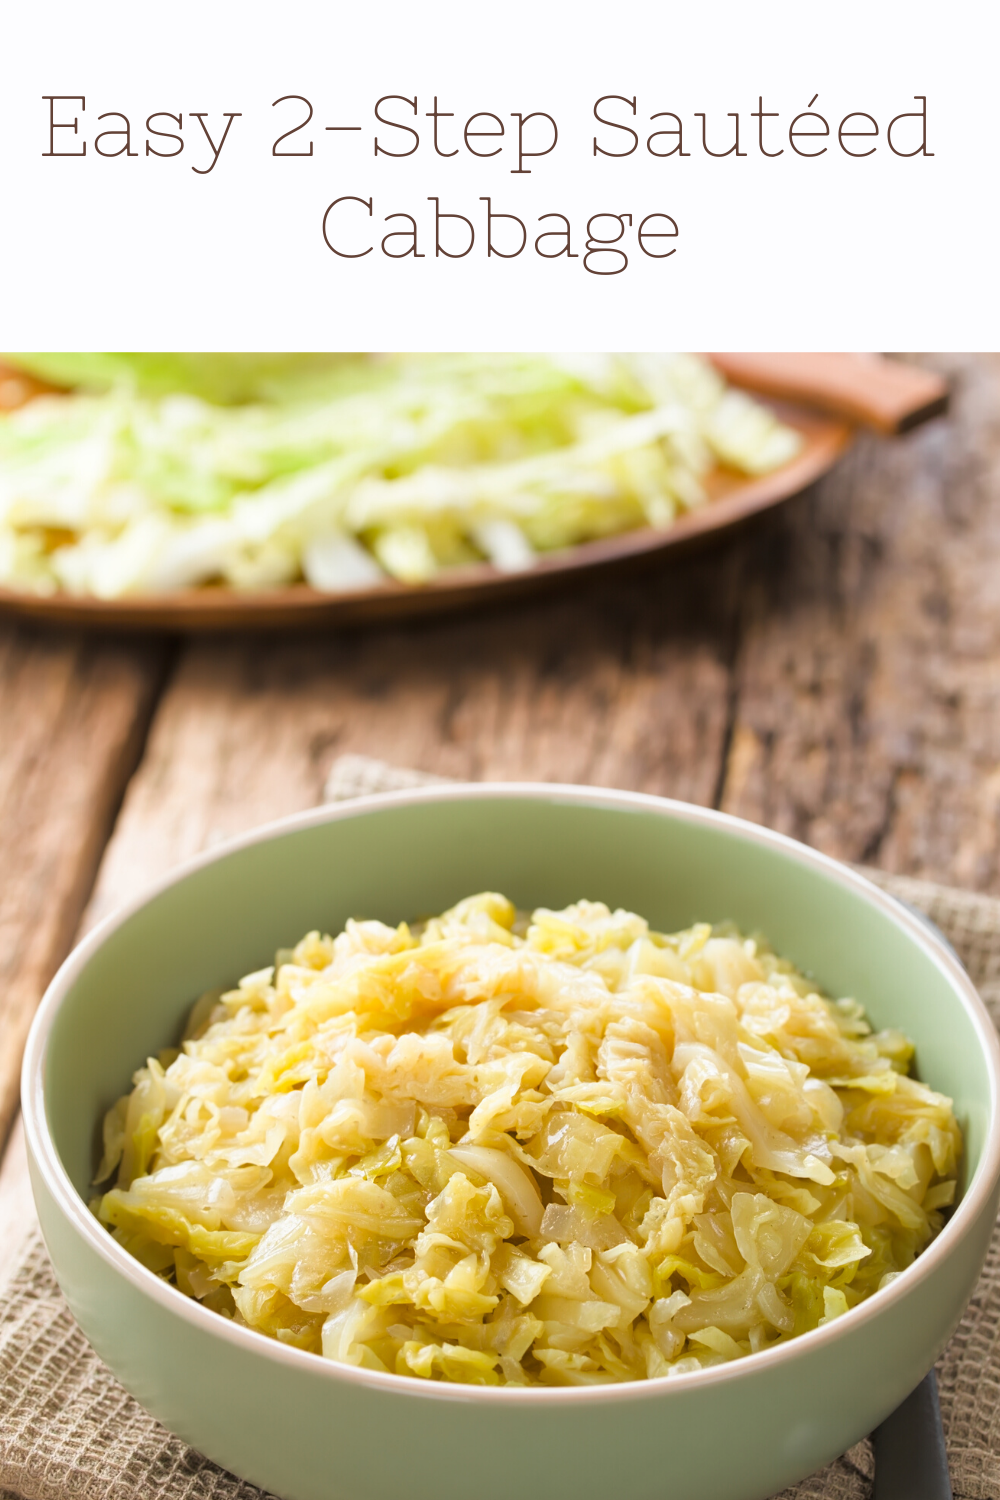 Easy 2-Step Sauteed Cabbage